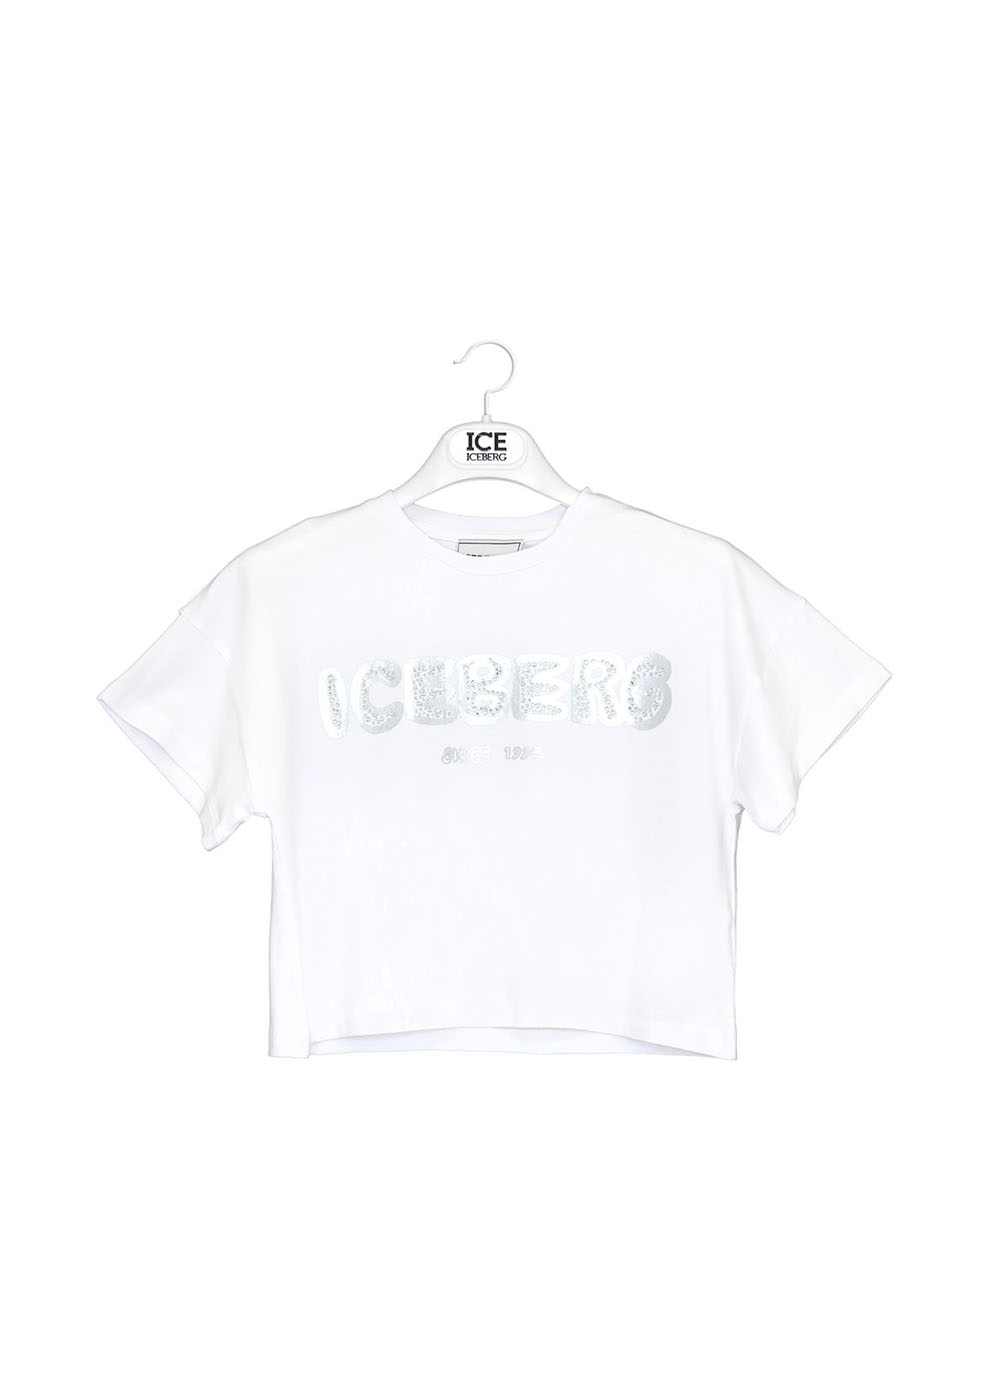 Featured image for “ICEBERG T-SHIRT CON LOGO”